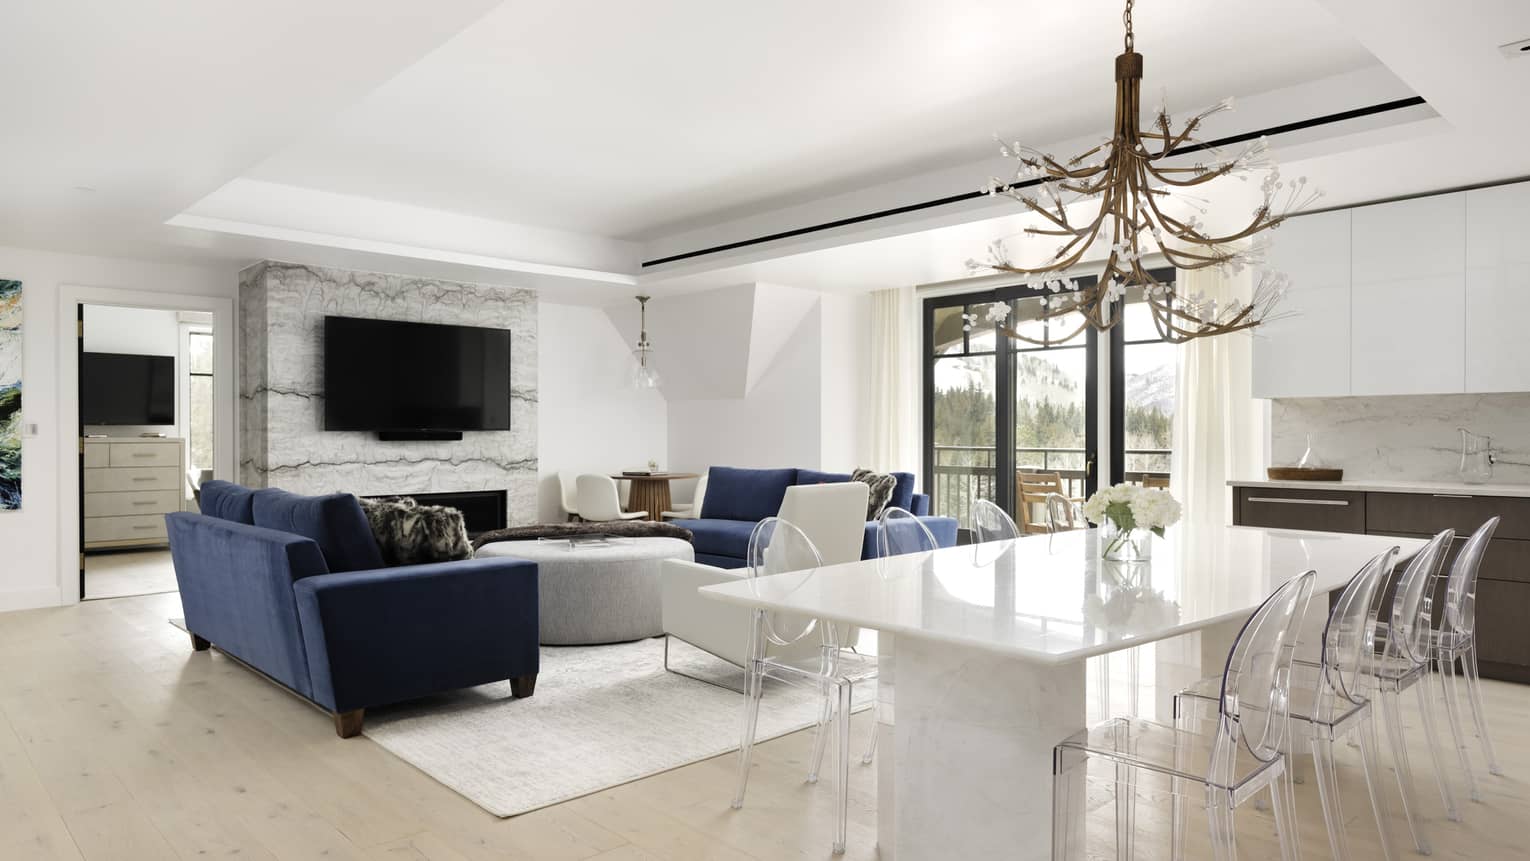 Living area with two dark blue sofas, fireplace, TV, opening to dining area with white table and 8 clear chairs